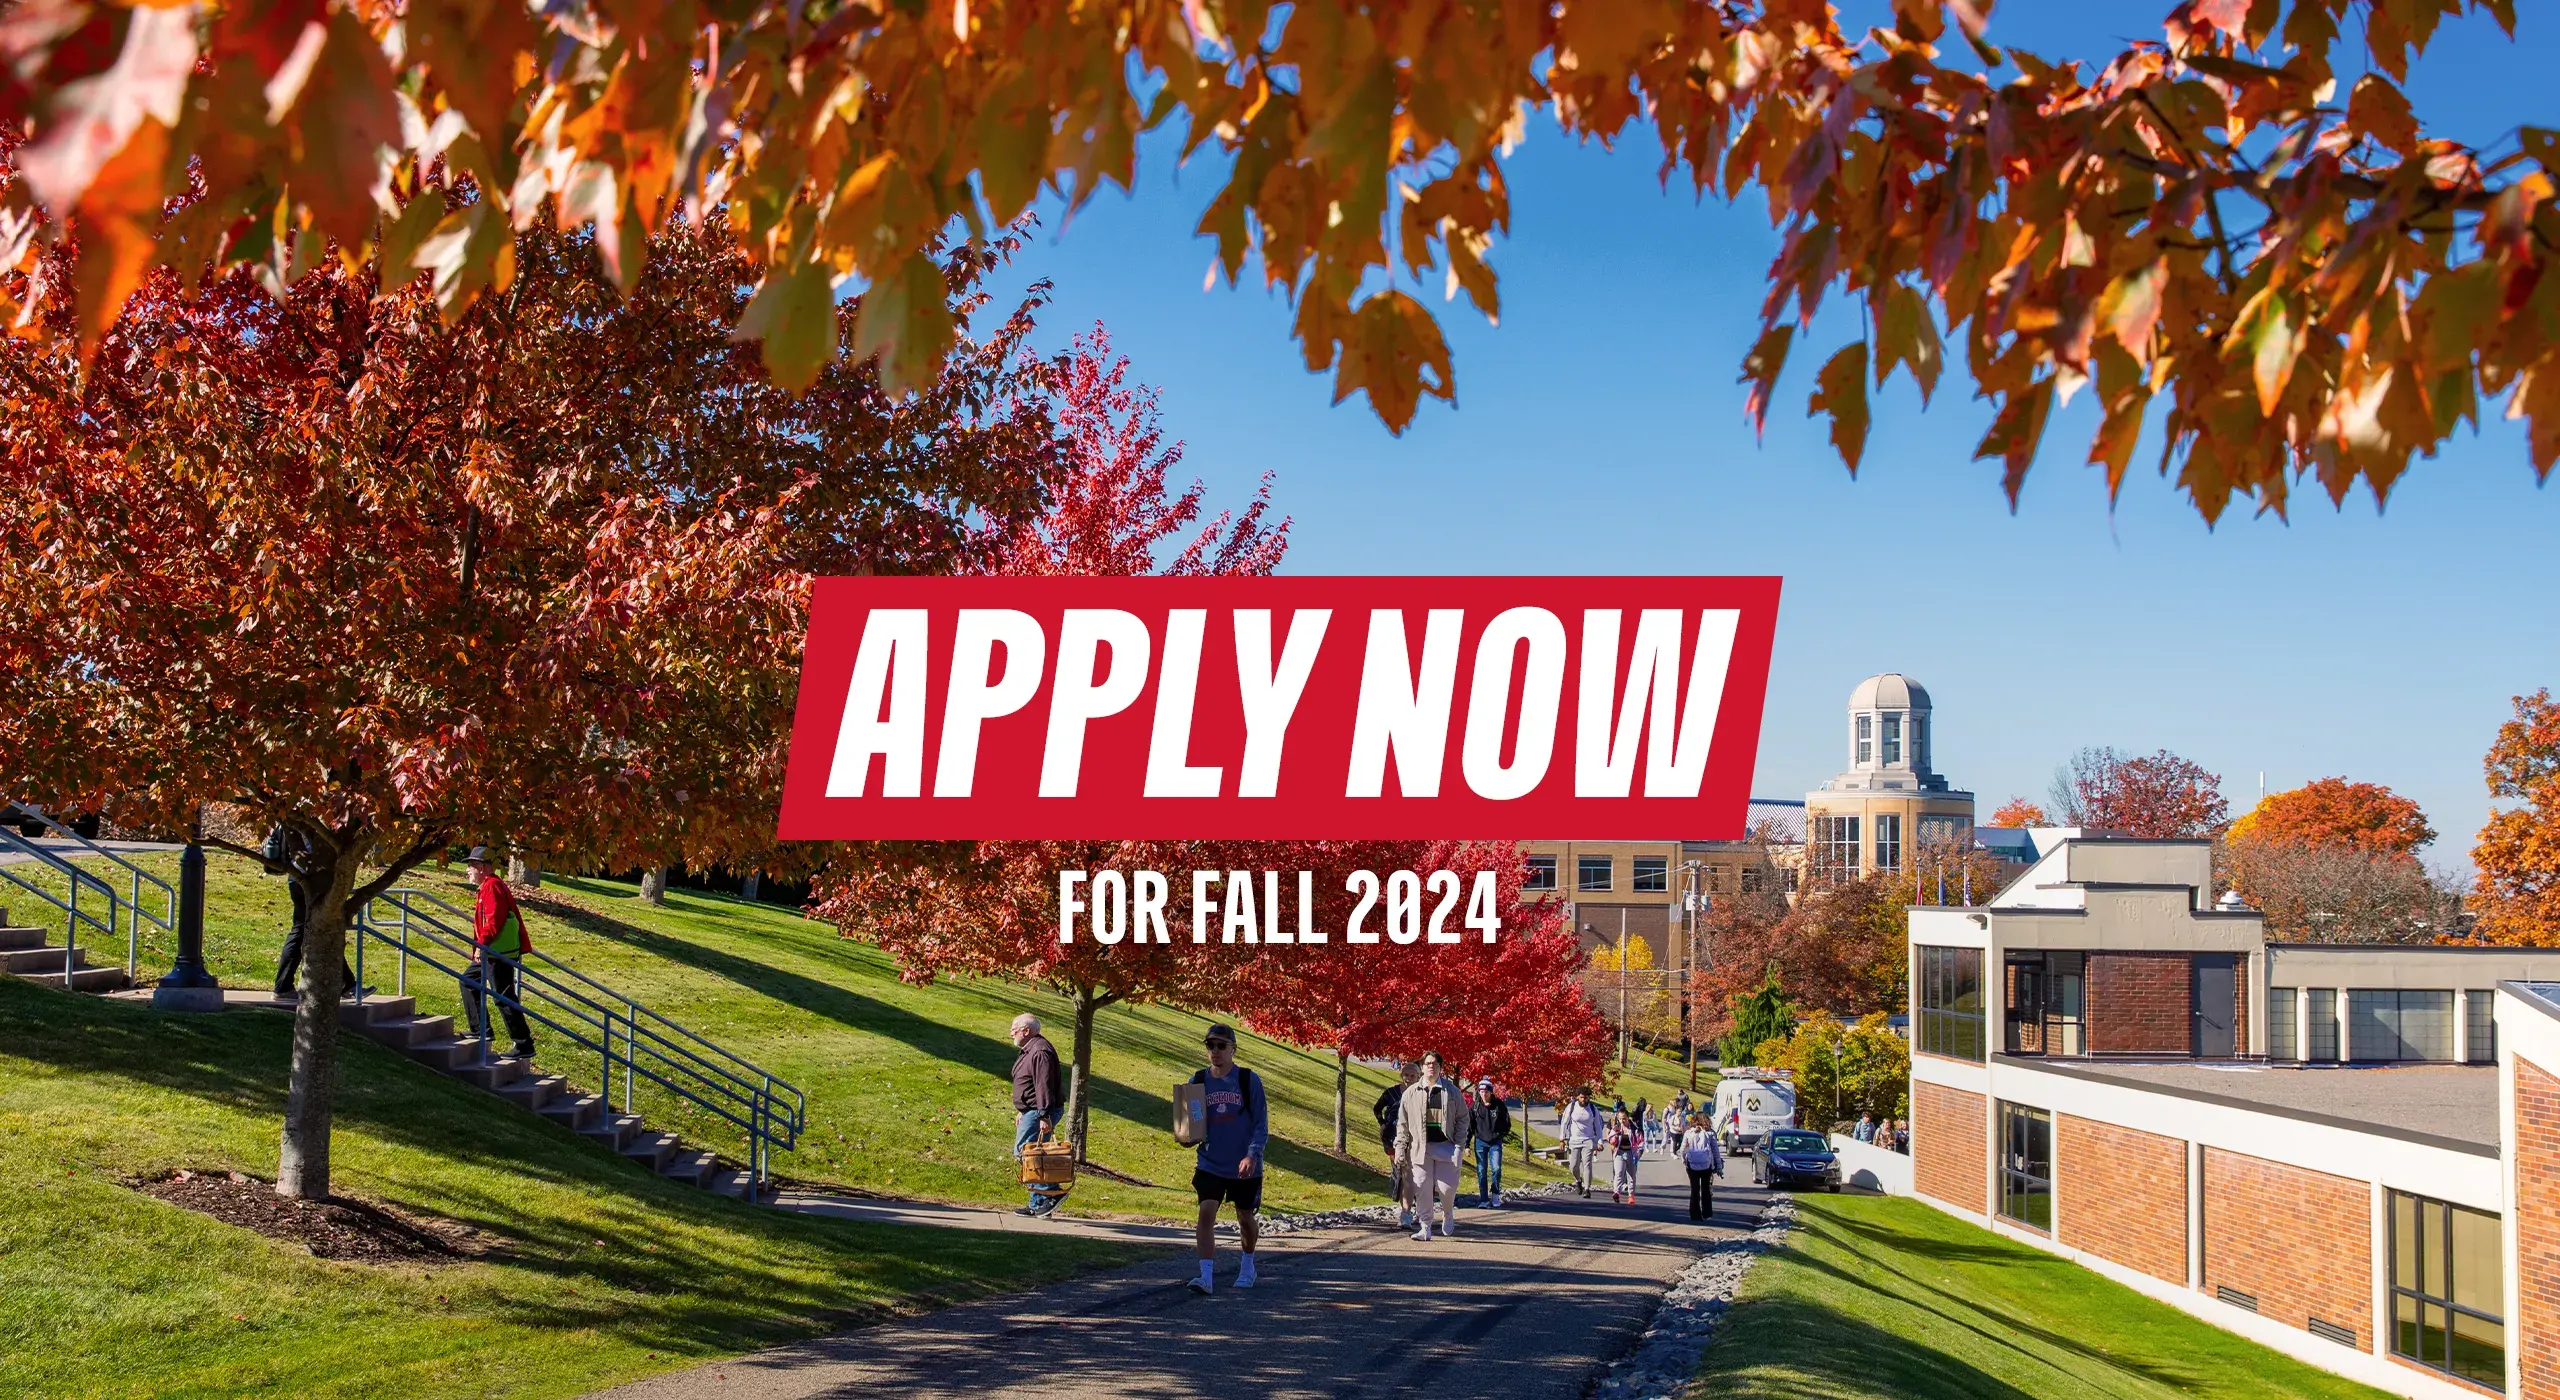 Apply Now for Fall 2024!